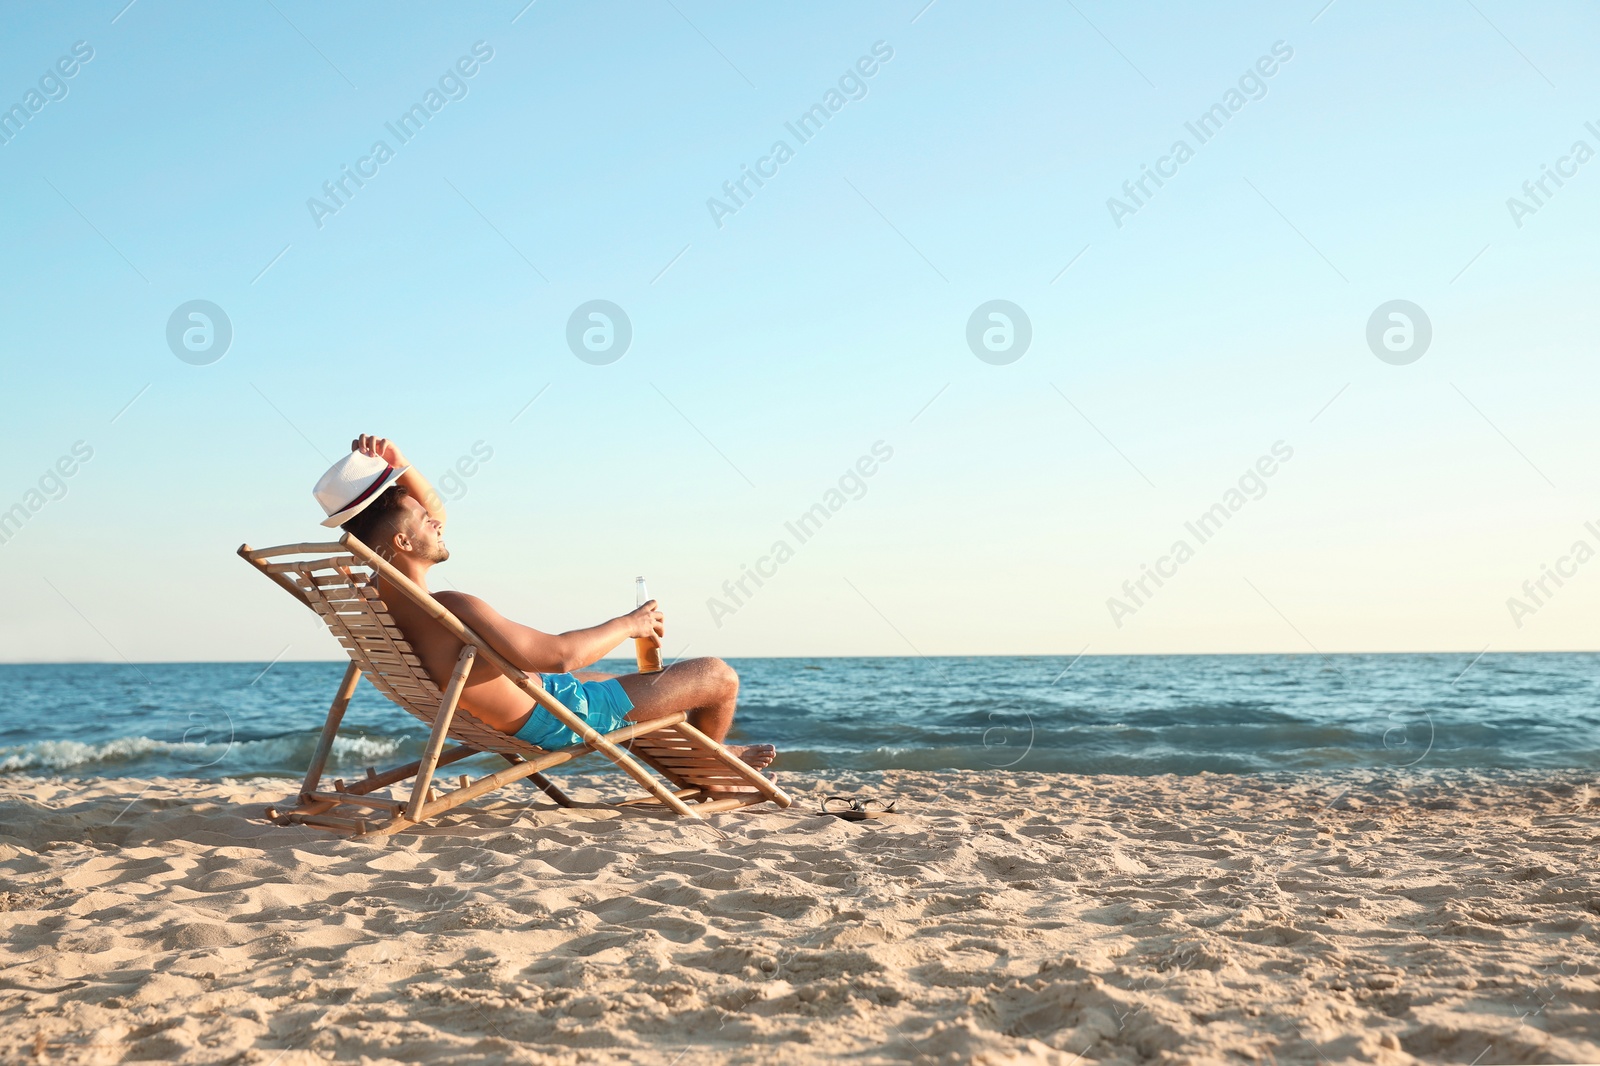 Photo of Young man relaxing in deck chair on beach near sea